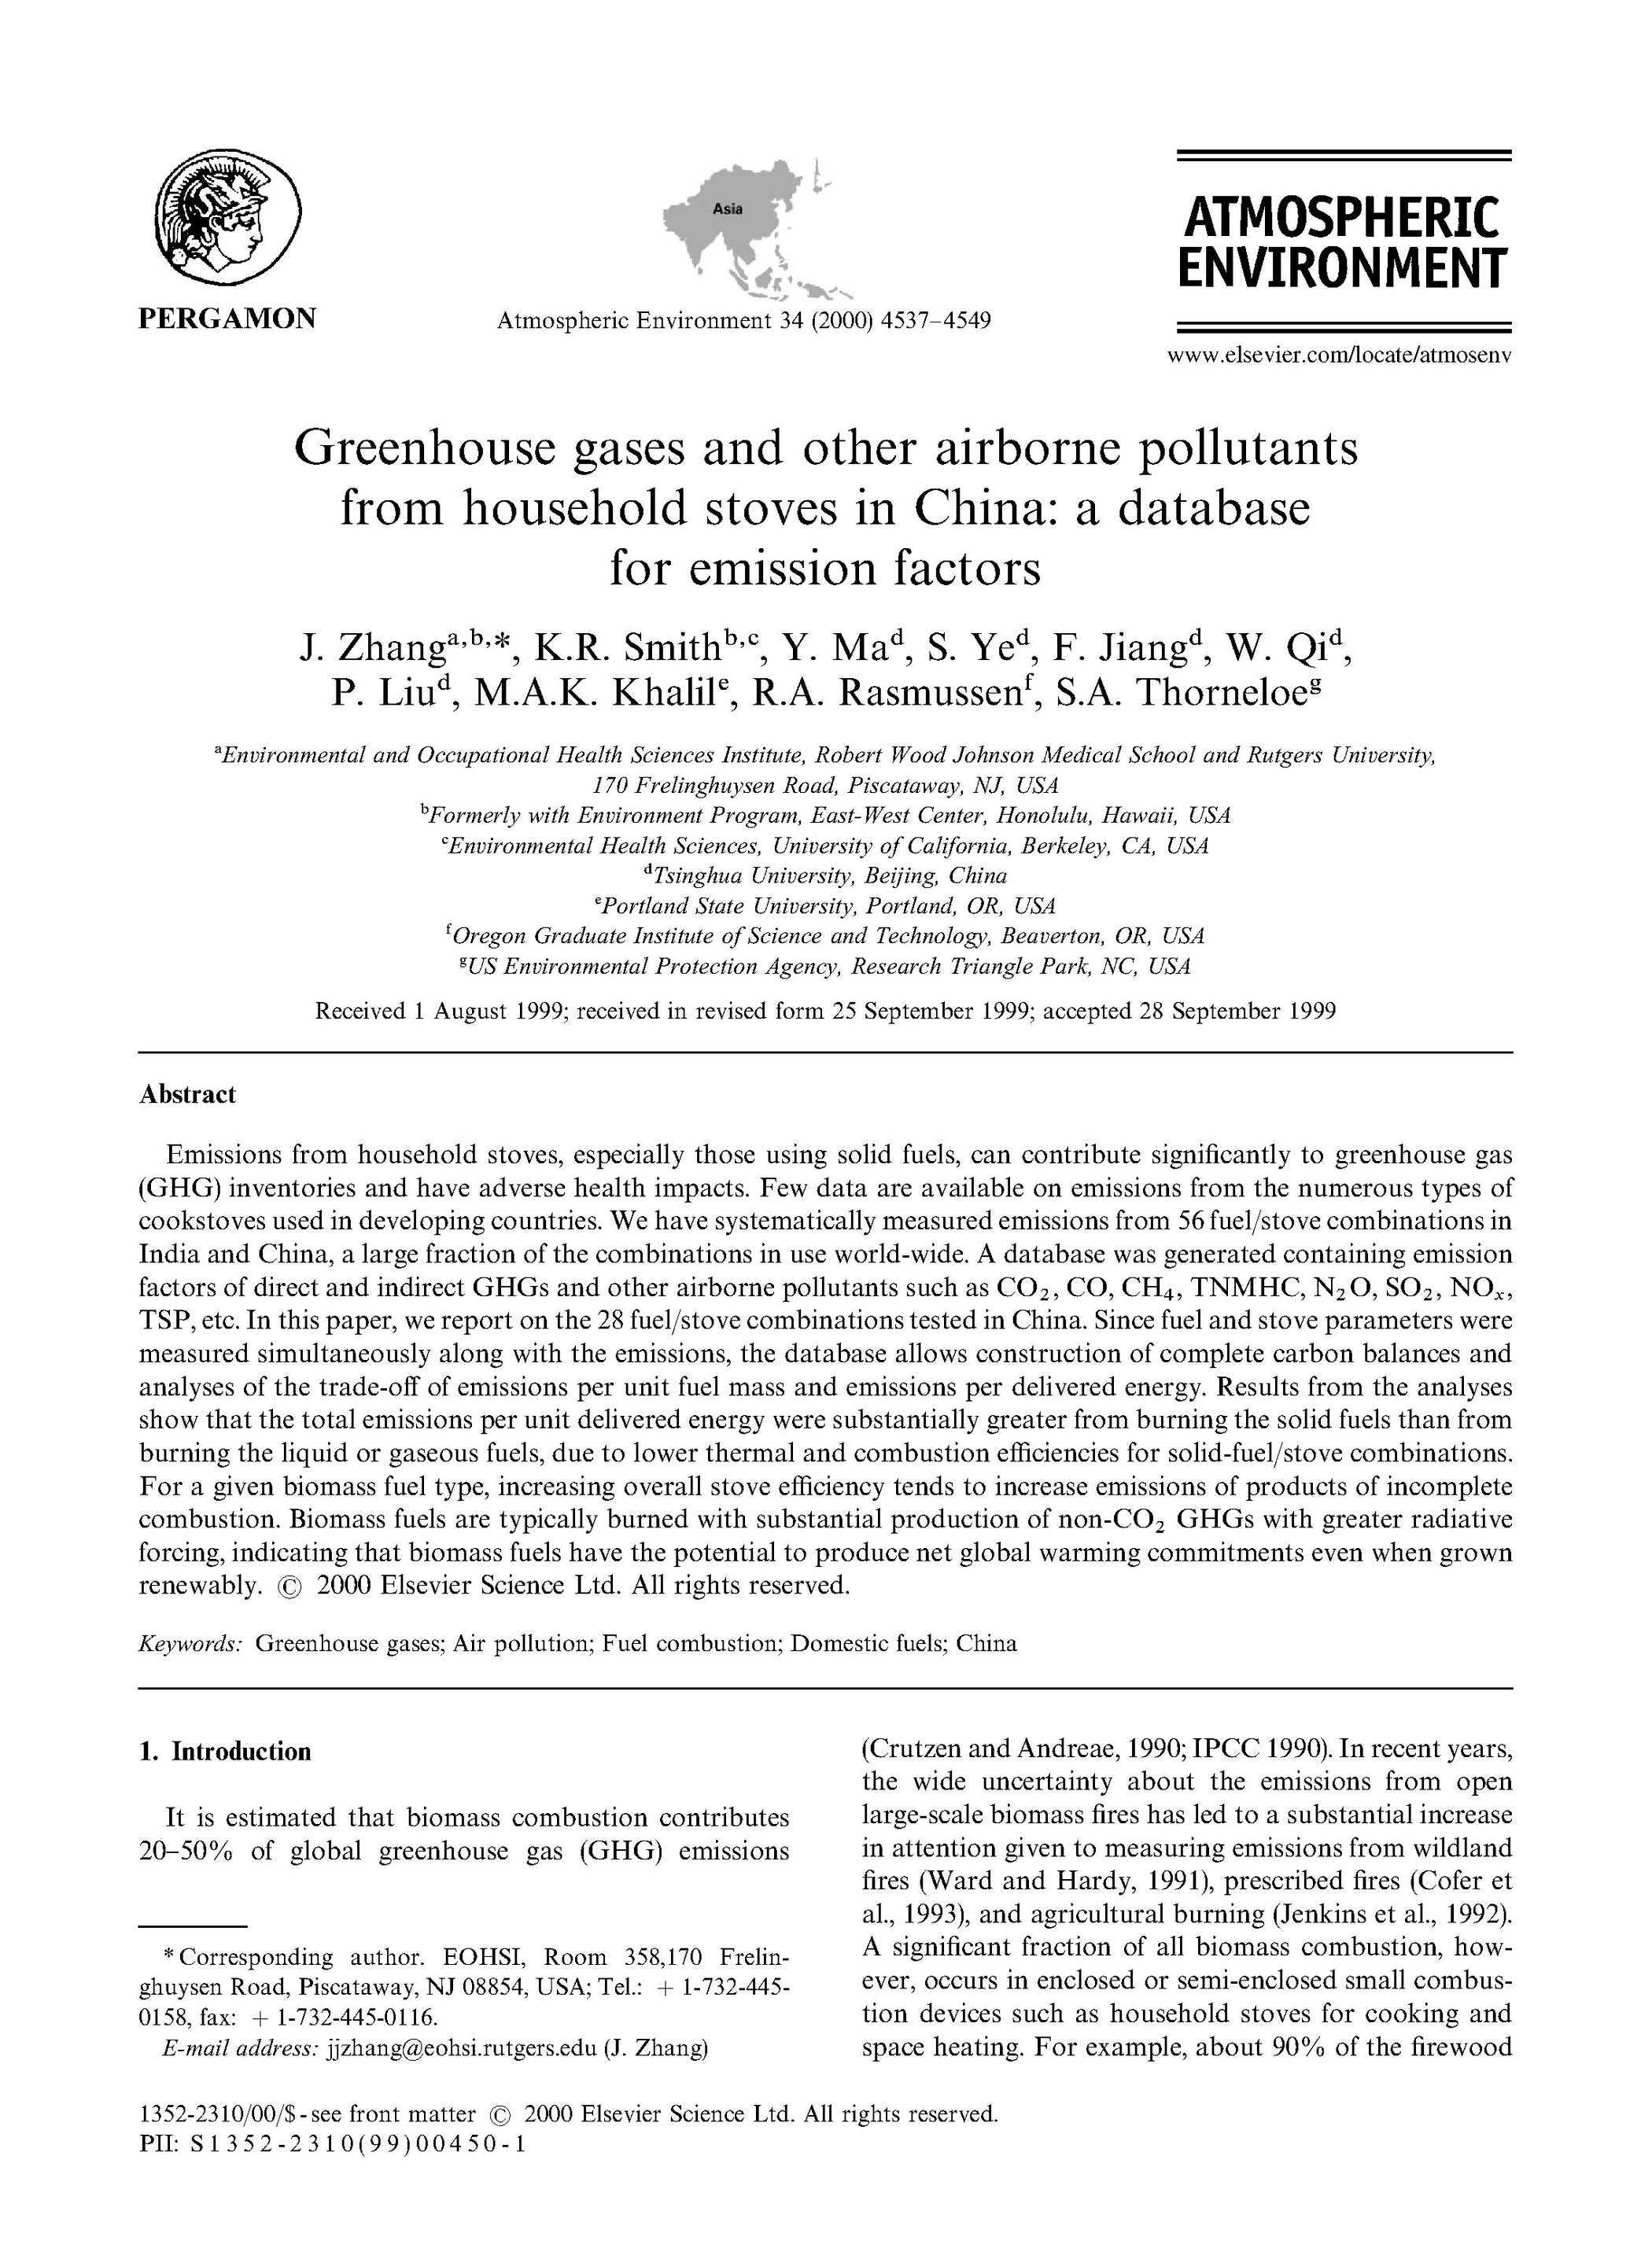 Greenhouse gases and other airborne pollutants from household stoves in China: A database for emission factors